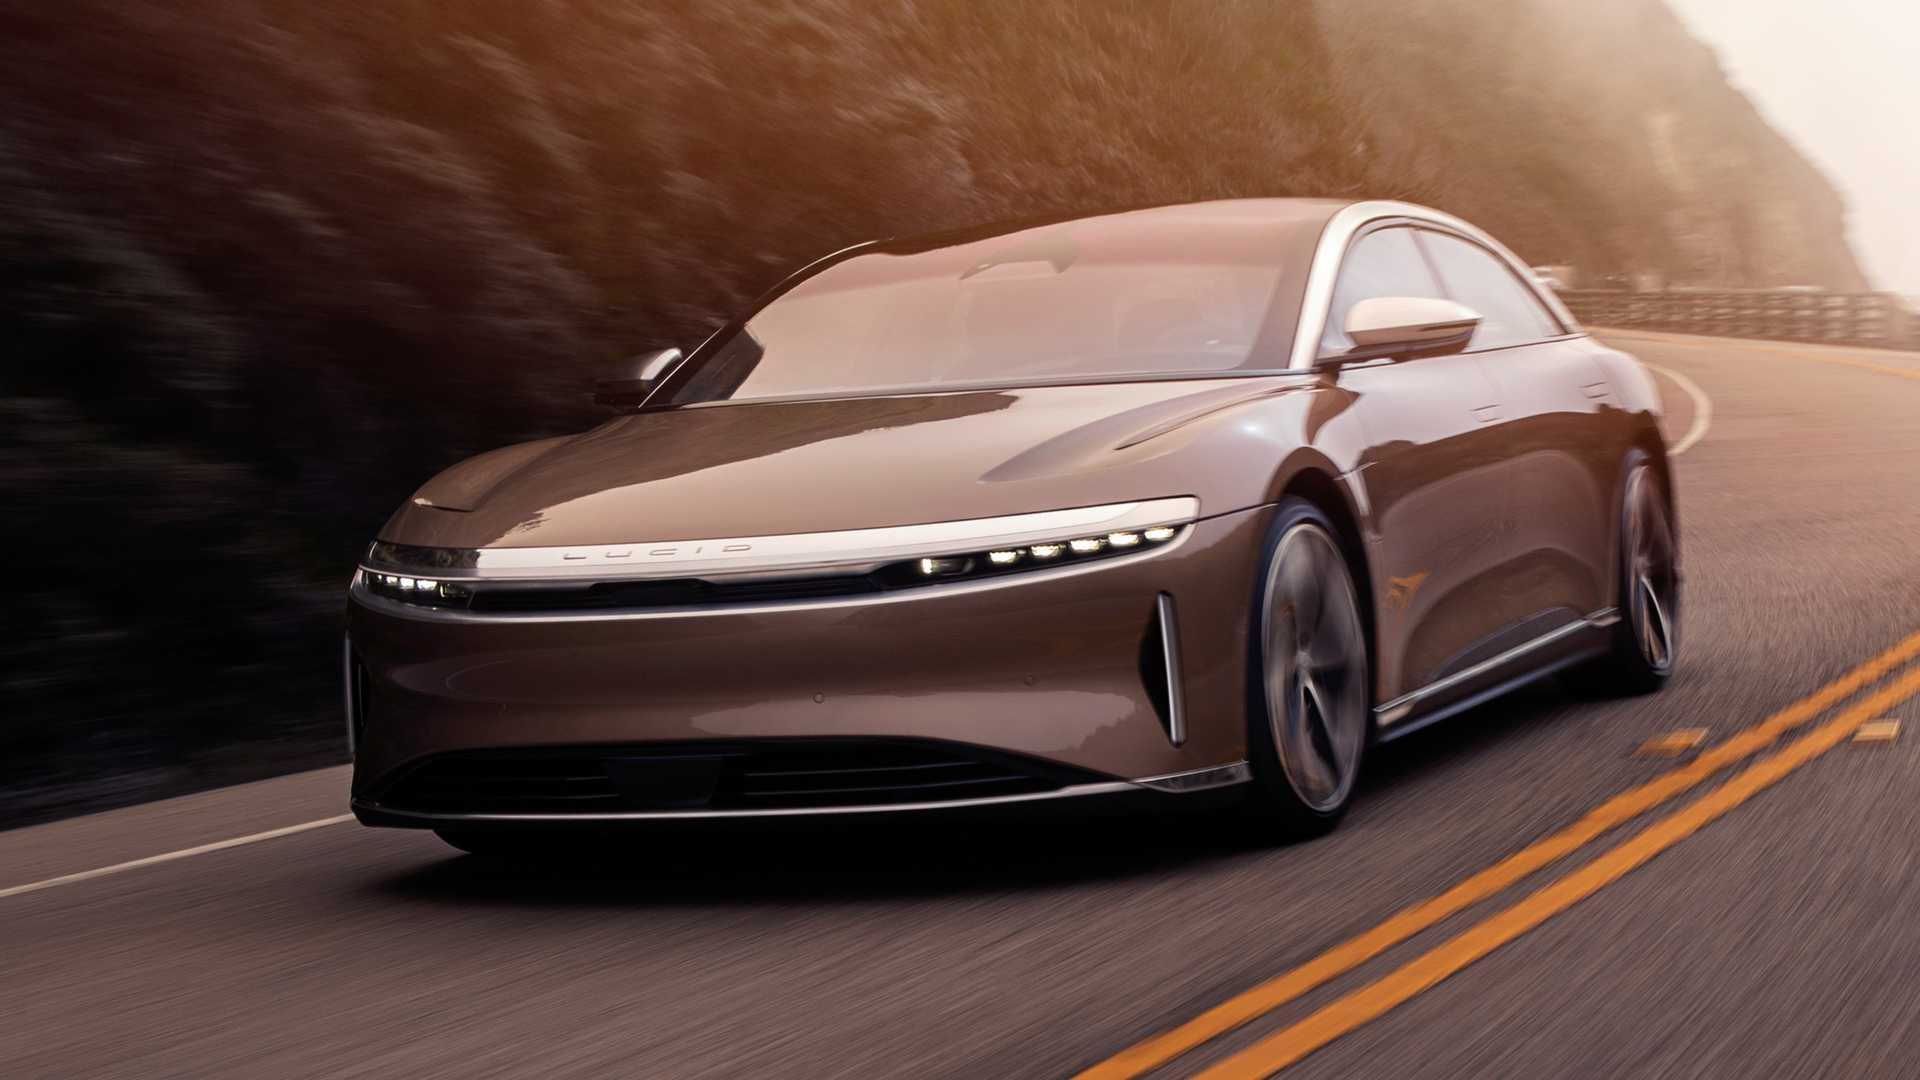 Lucid Air Receives Best Luxury Electric Car at the World Future Awards